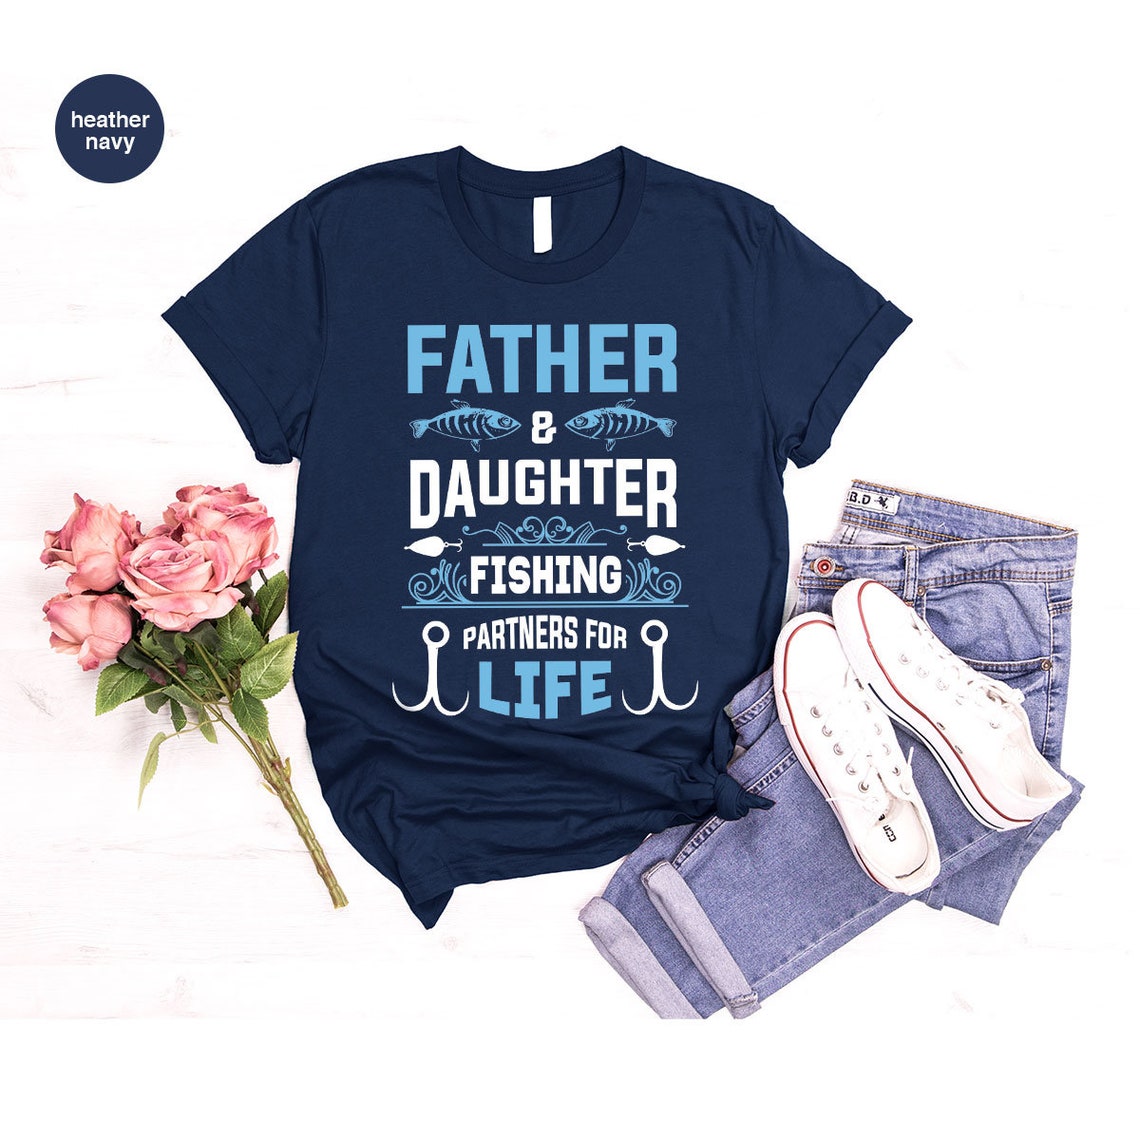 Father and Daughter Tshirts for Fishing Partners